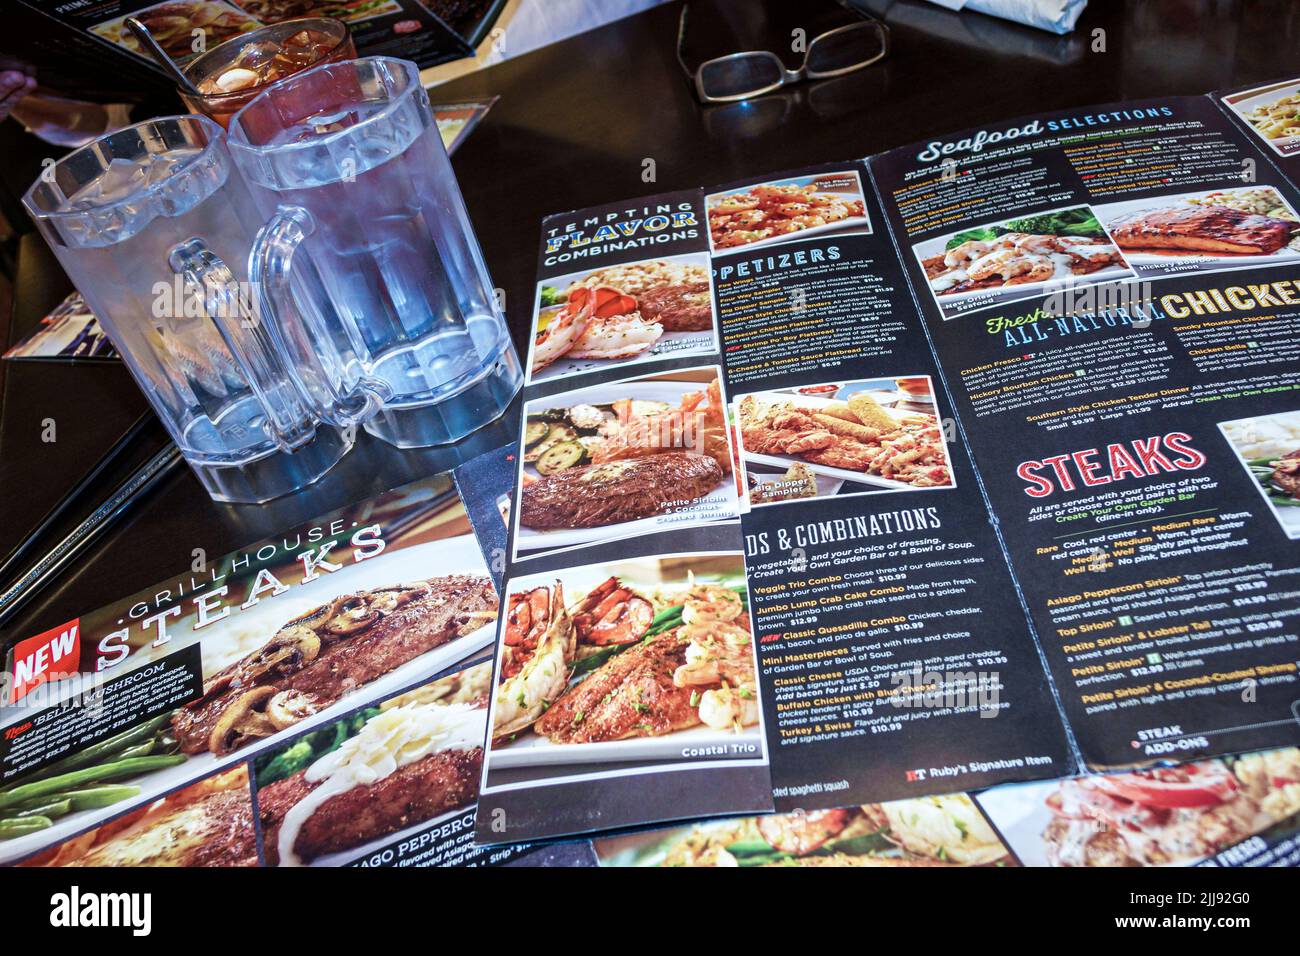 Ellenton Florida,Ruby Tuesday,restaurant restaurants food dining eating out interior inside menu menus choices main course,scene in a photo,USA US Stock Photo